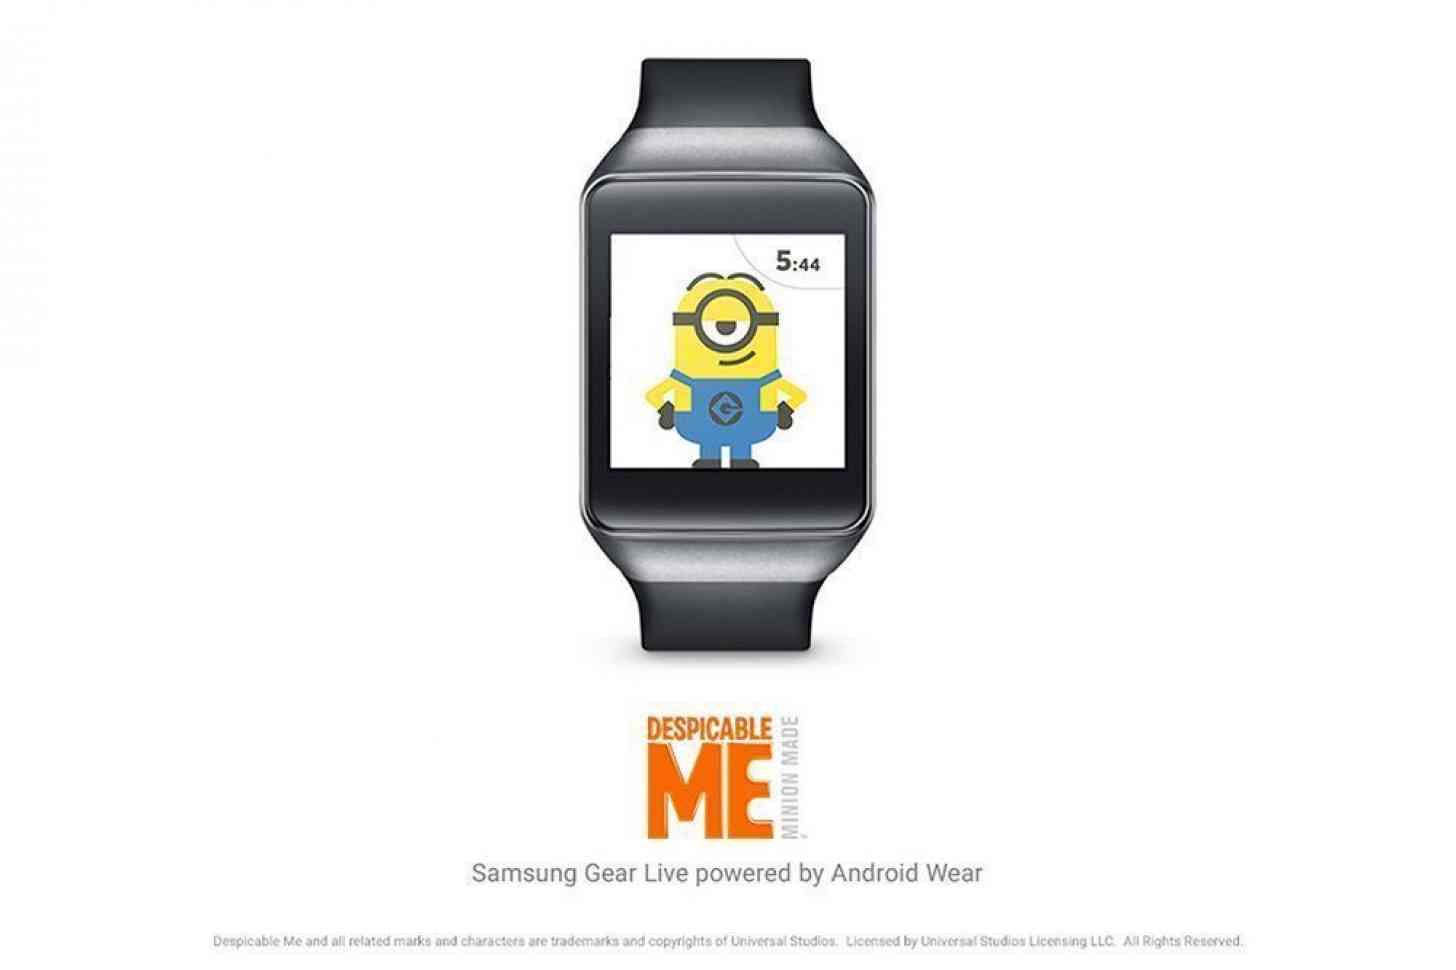 Despicable Me Android Wear watch face